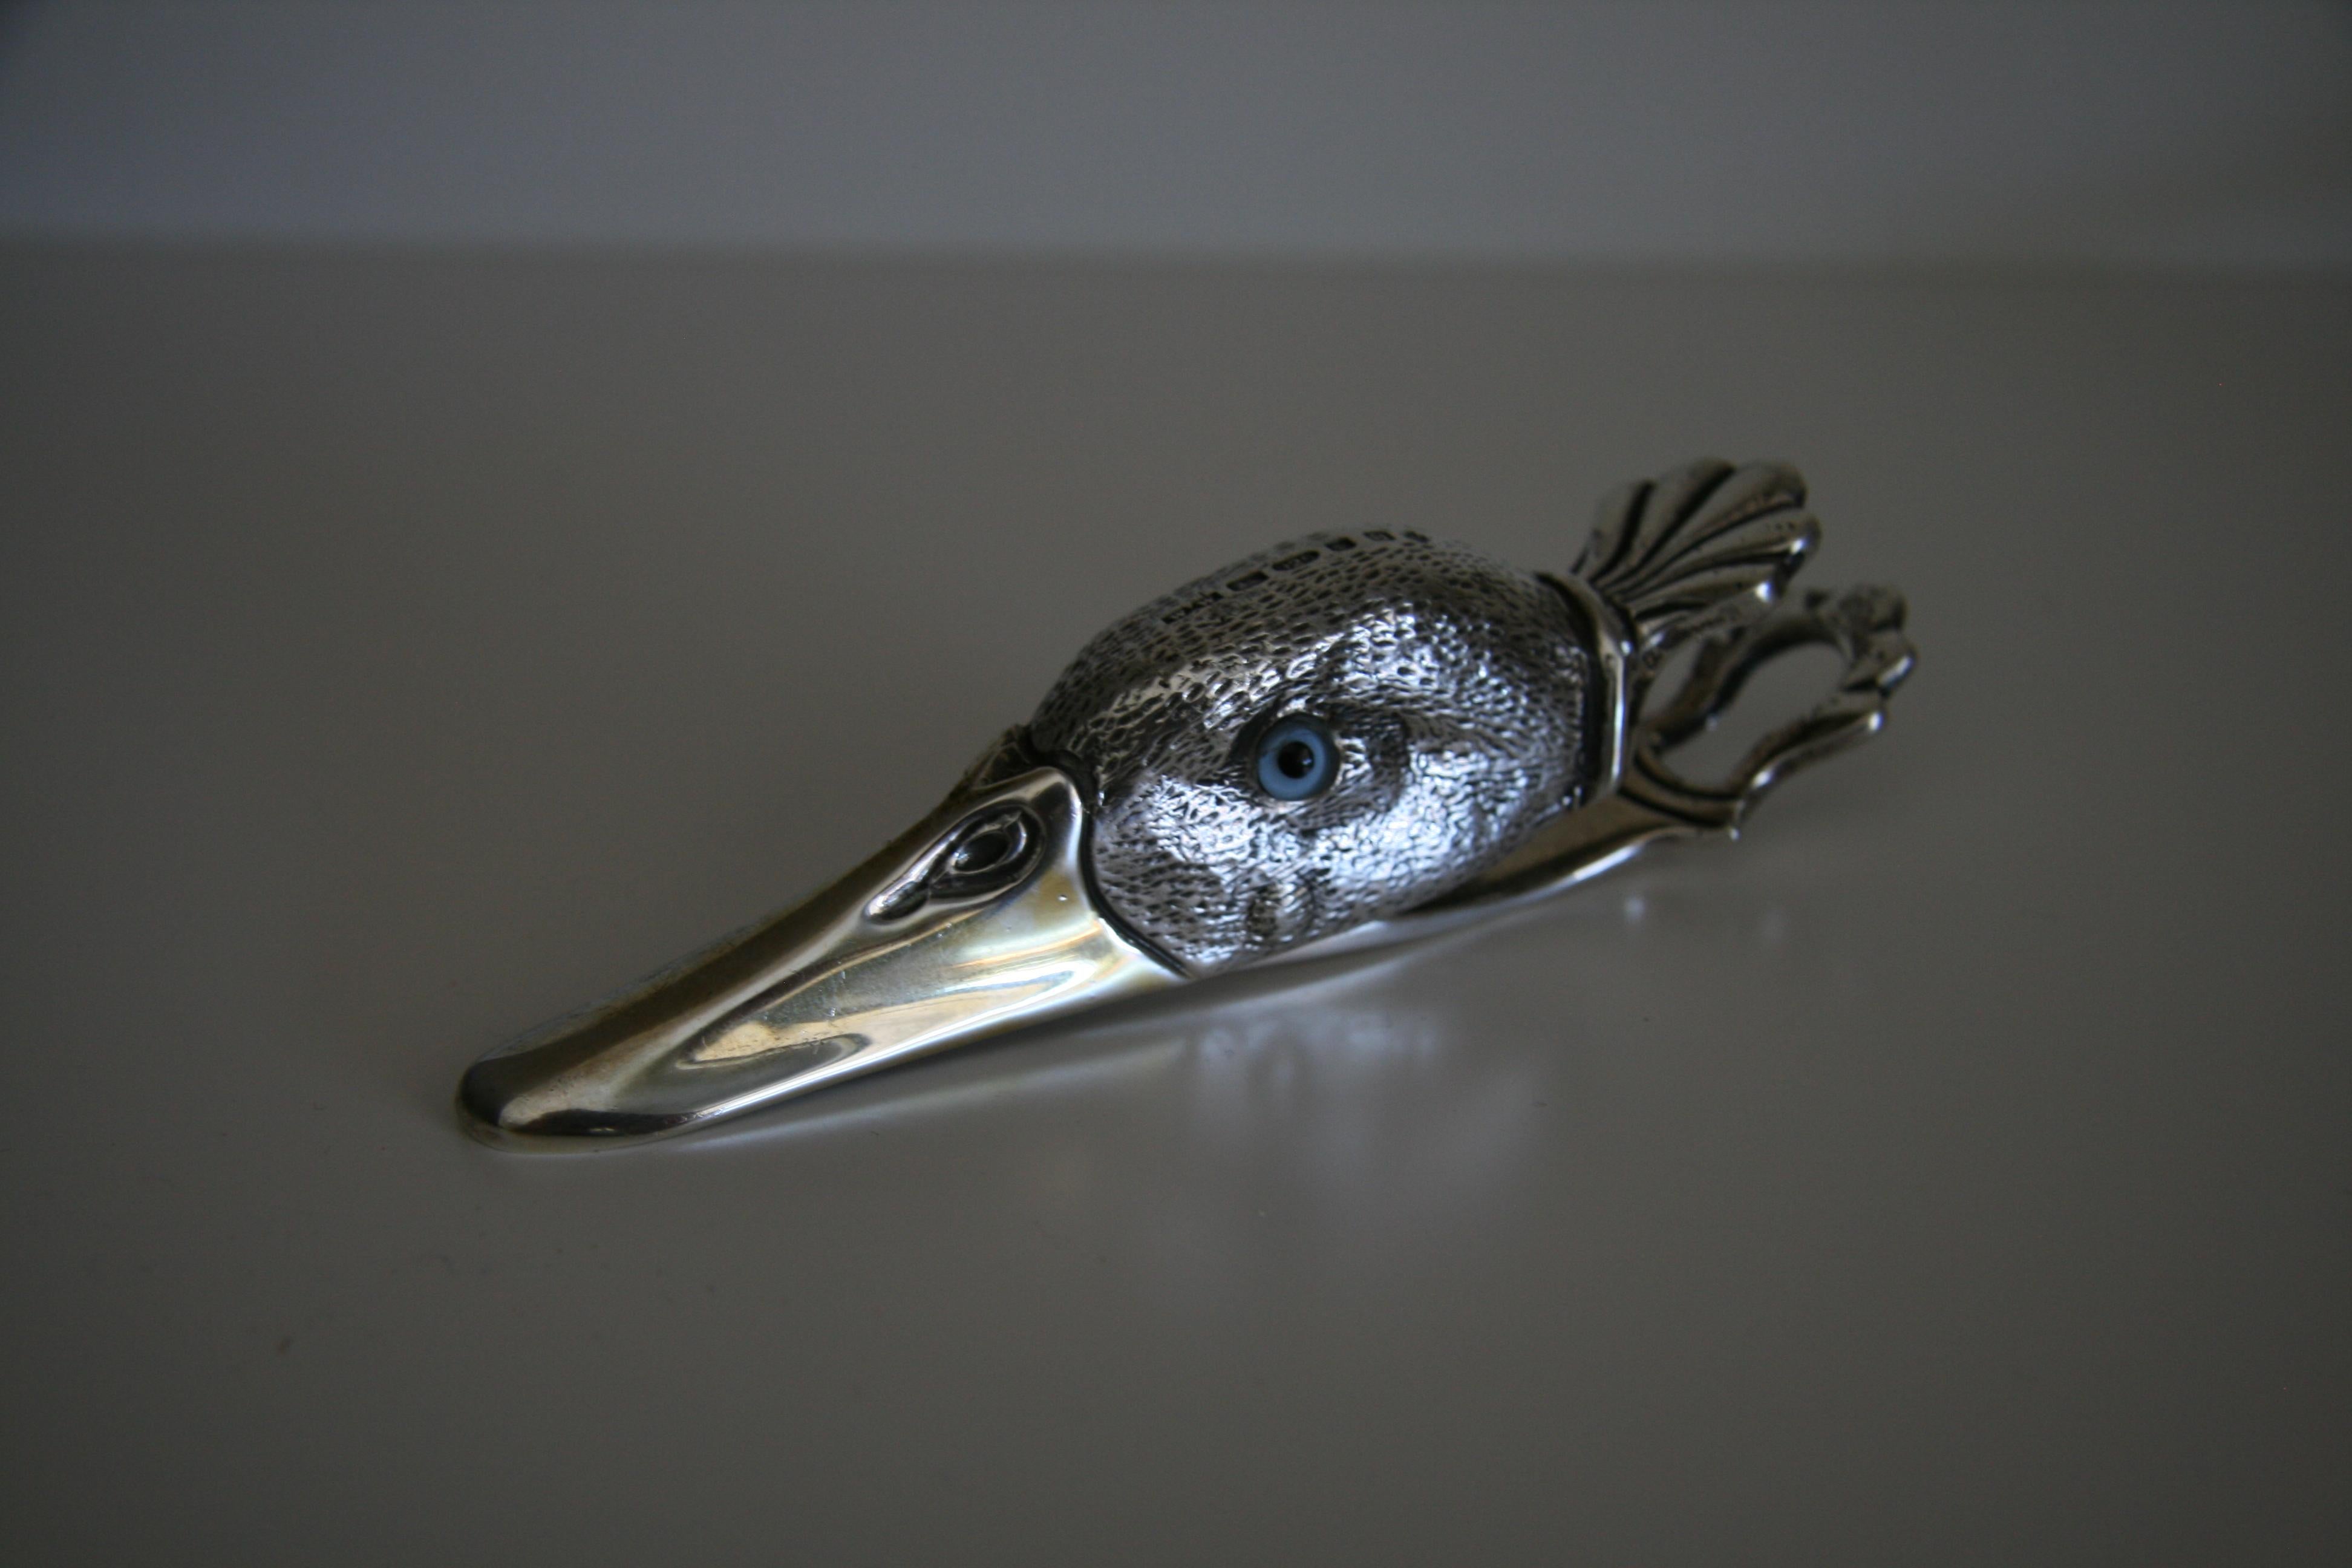 Francis Howard Hallmarked sterling silver novelty duck head paper clip.

English hallmarked solid silver ducks head. Features hinged sprung beak to clip together loose paperwork. Silver gilt beak with realistic life-like glass eyes.